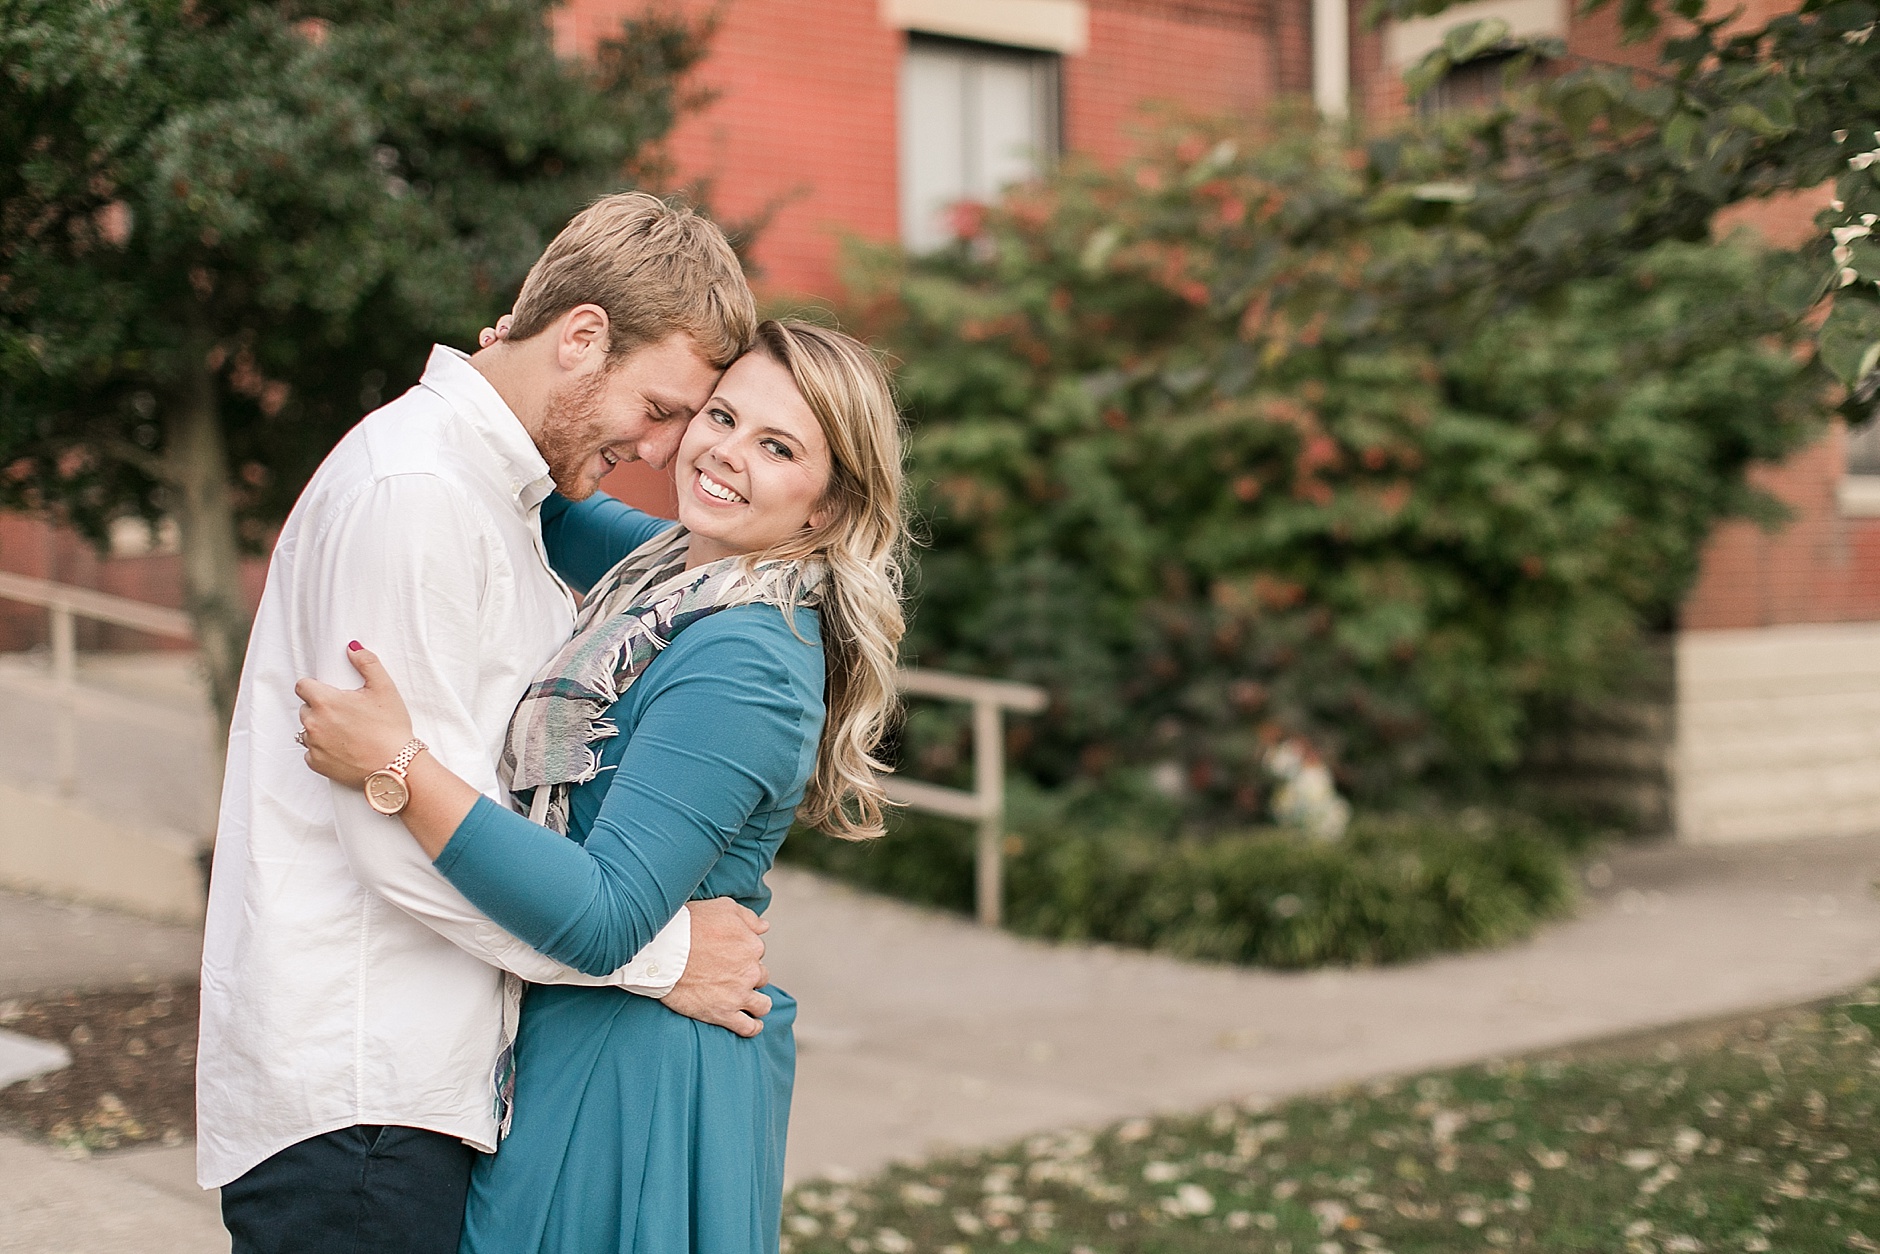 A Family Farm and Downtown Engagement Session in Mayfield Kentucky by Rachael Houser